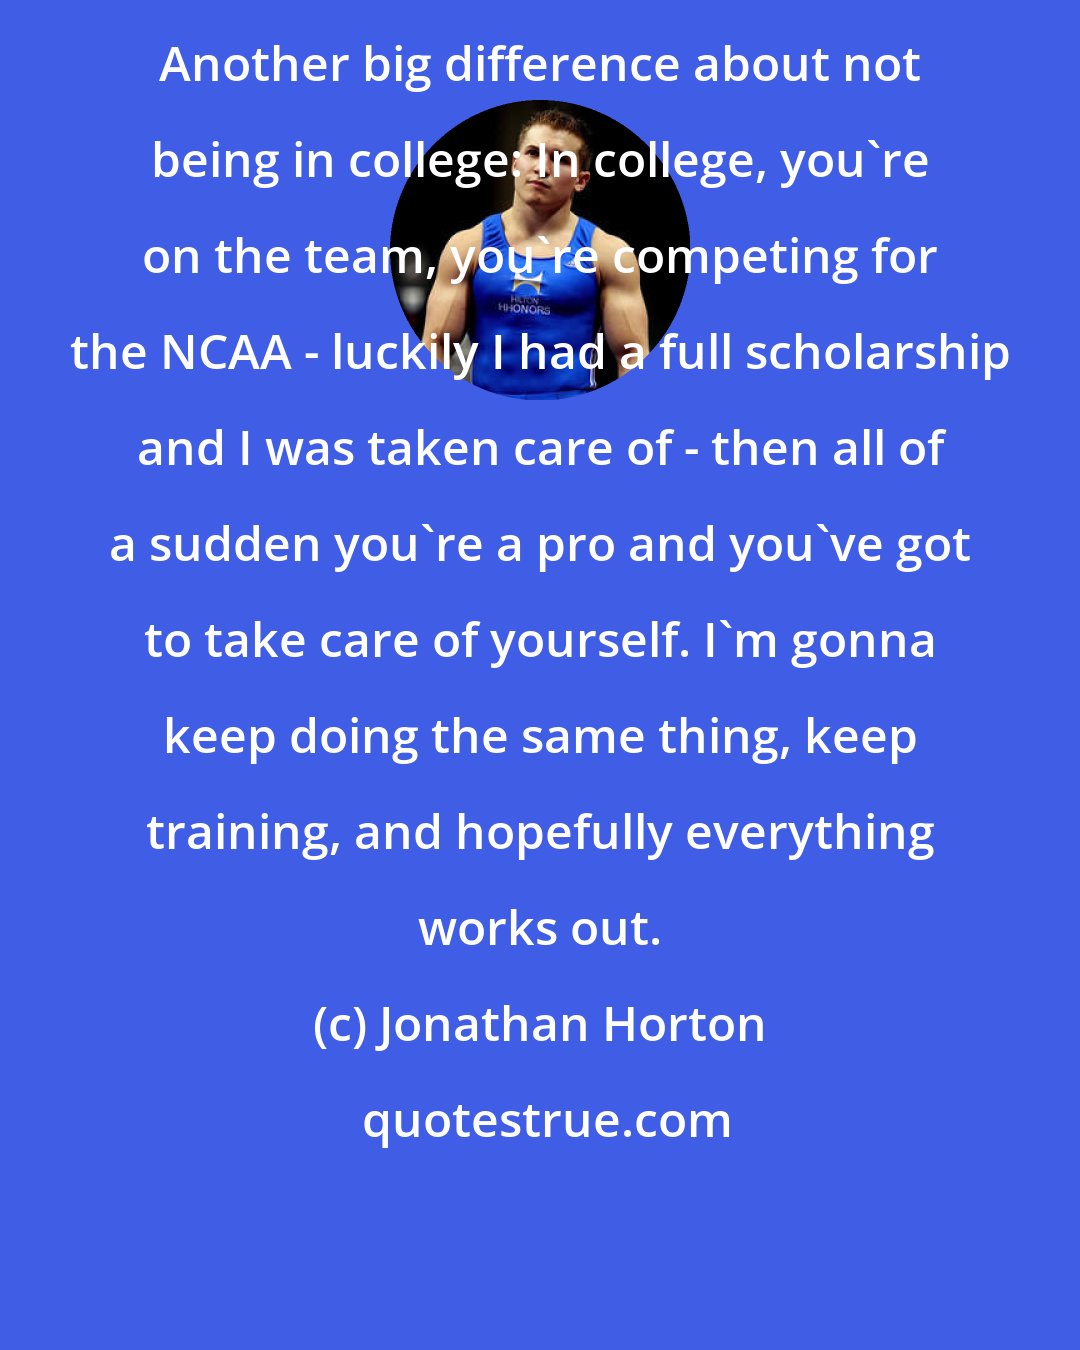 Jonathan Horton: Another big difference about not being in college: In college, you're on the team, you're competing for the NCAA - luckily I had a full scholarship and I was taken care of - then all of a sudden you're a pro and you've got to take care of yourself. I'm gonna keep doing the same thing, keep training, and hopefully everything works out.